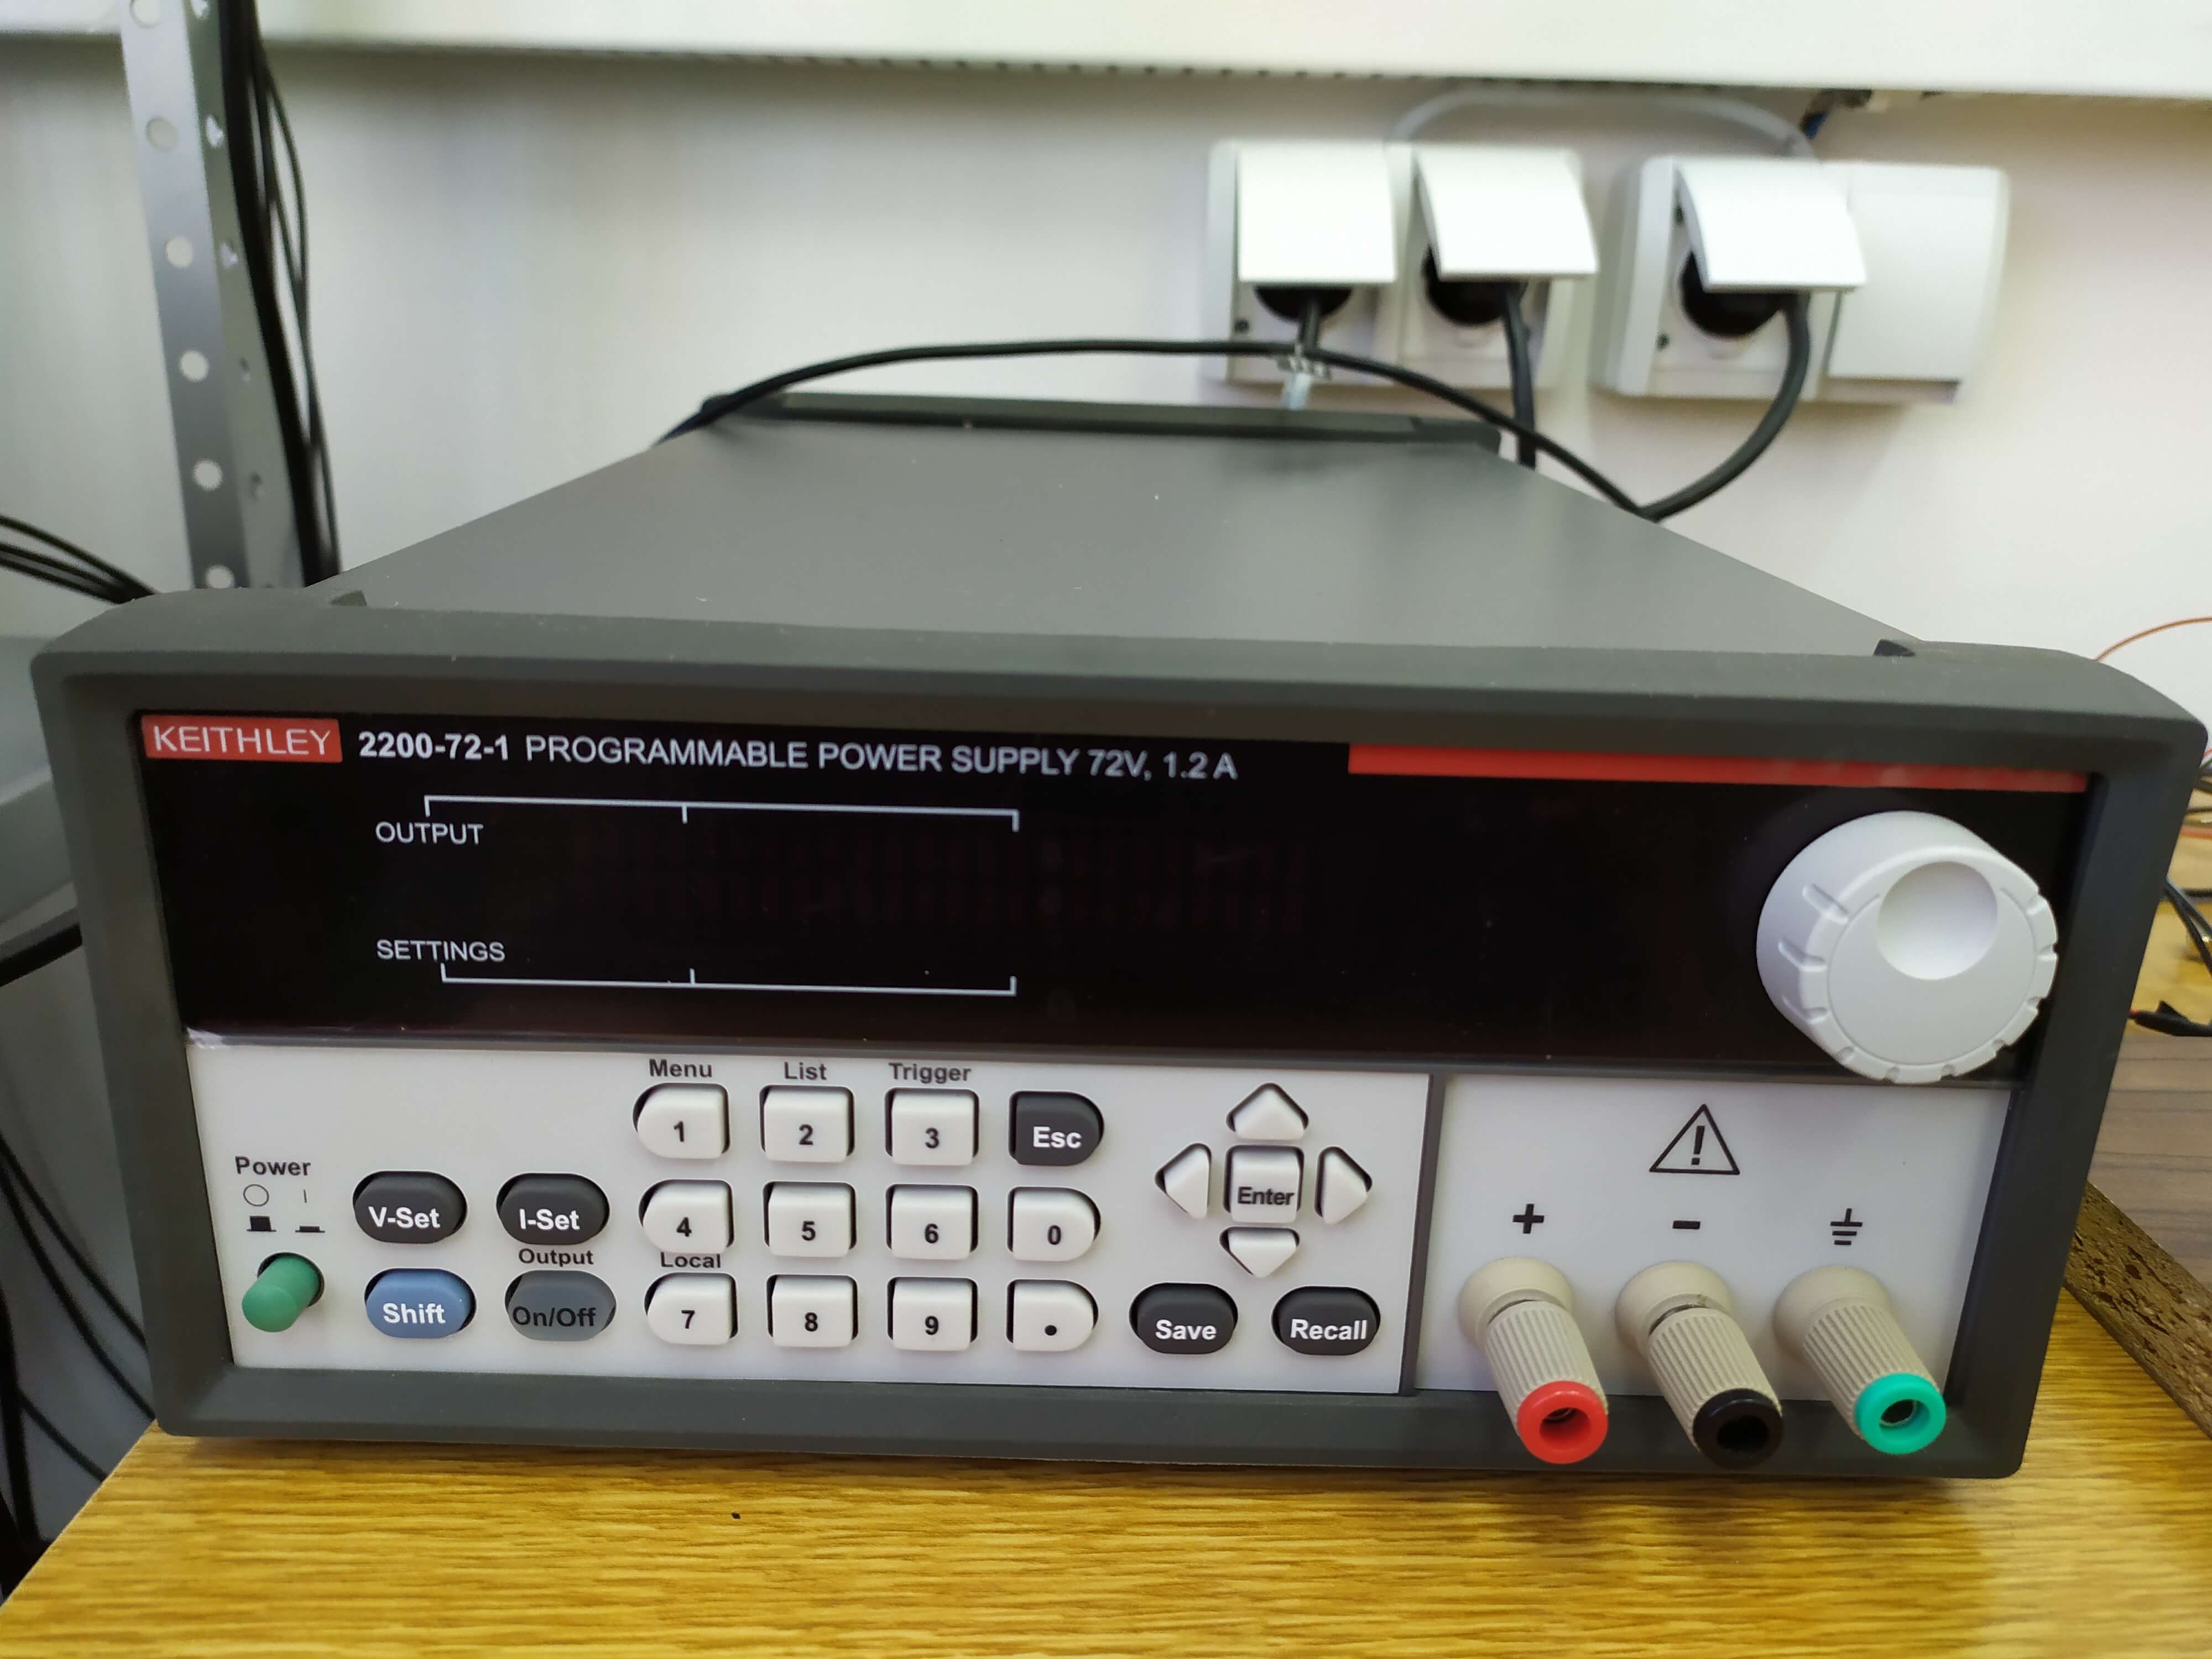 2200-72-1 Keithley Programmable Power Supply 72V, 1.2 A